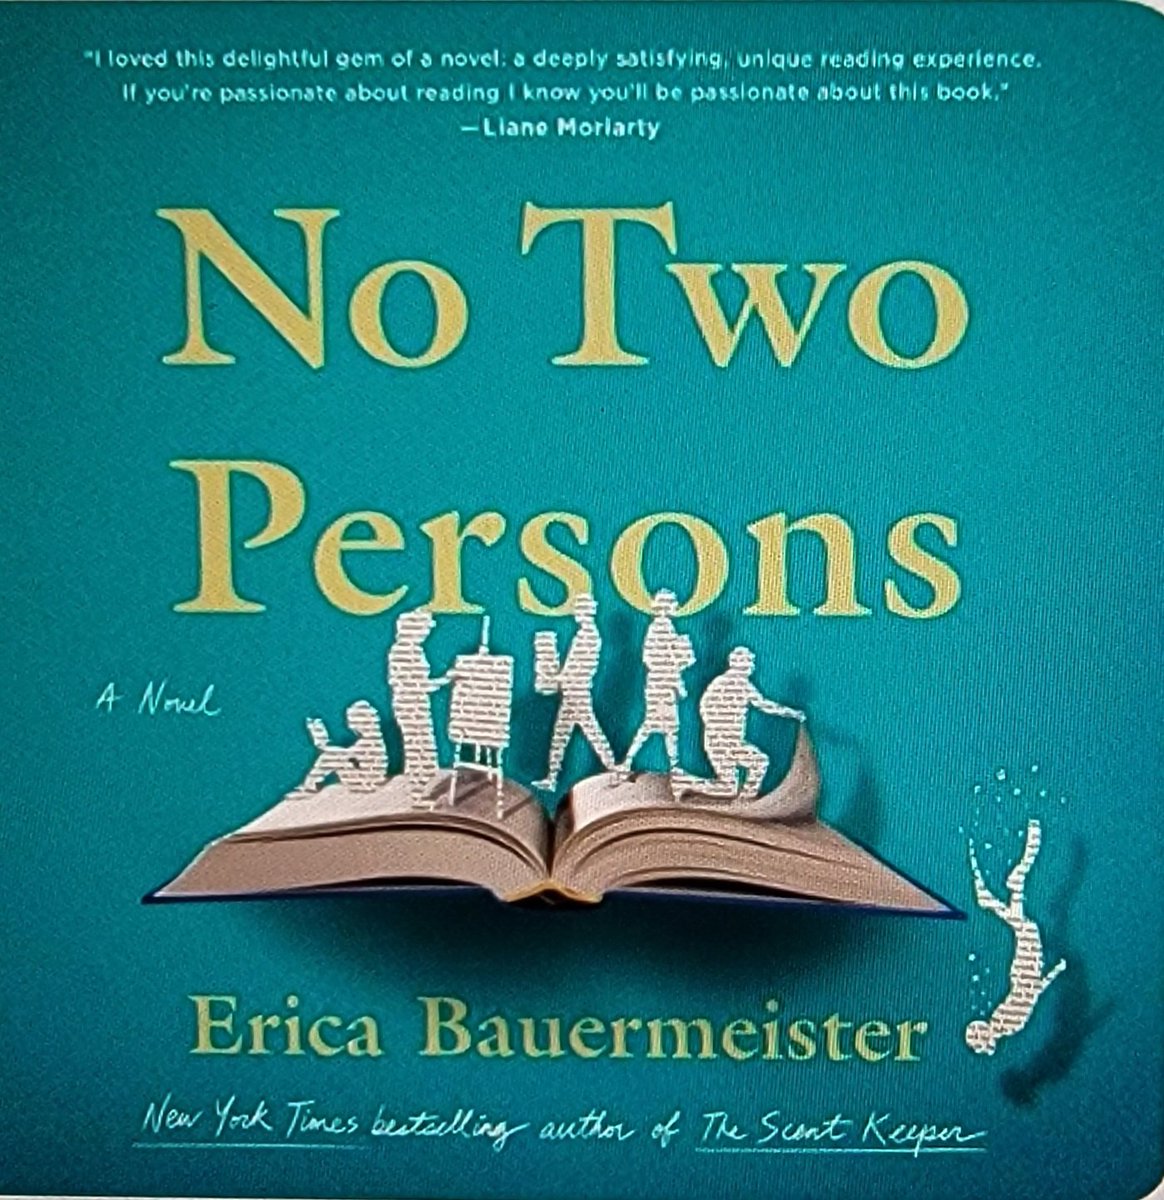 Another excellent novel from my 2023 top ten book list. I especially enjoyed the audiobook version of NO TWO PERSONS #ericabauermeister @StMartinsPress Highly recommended!